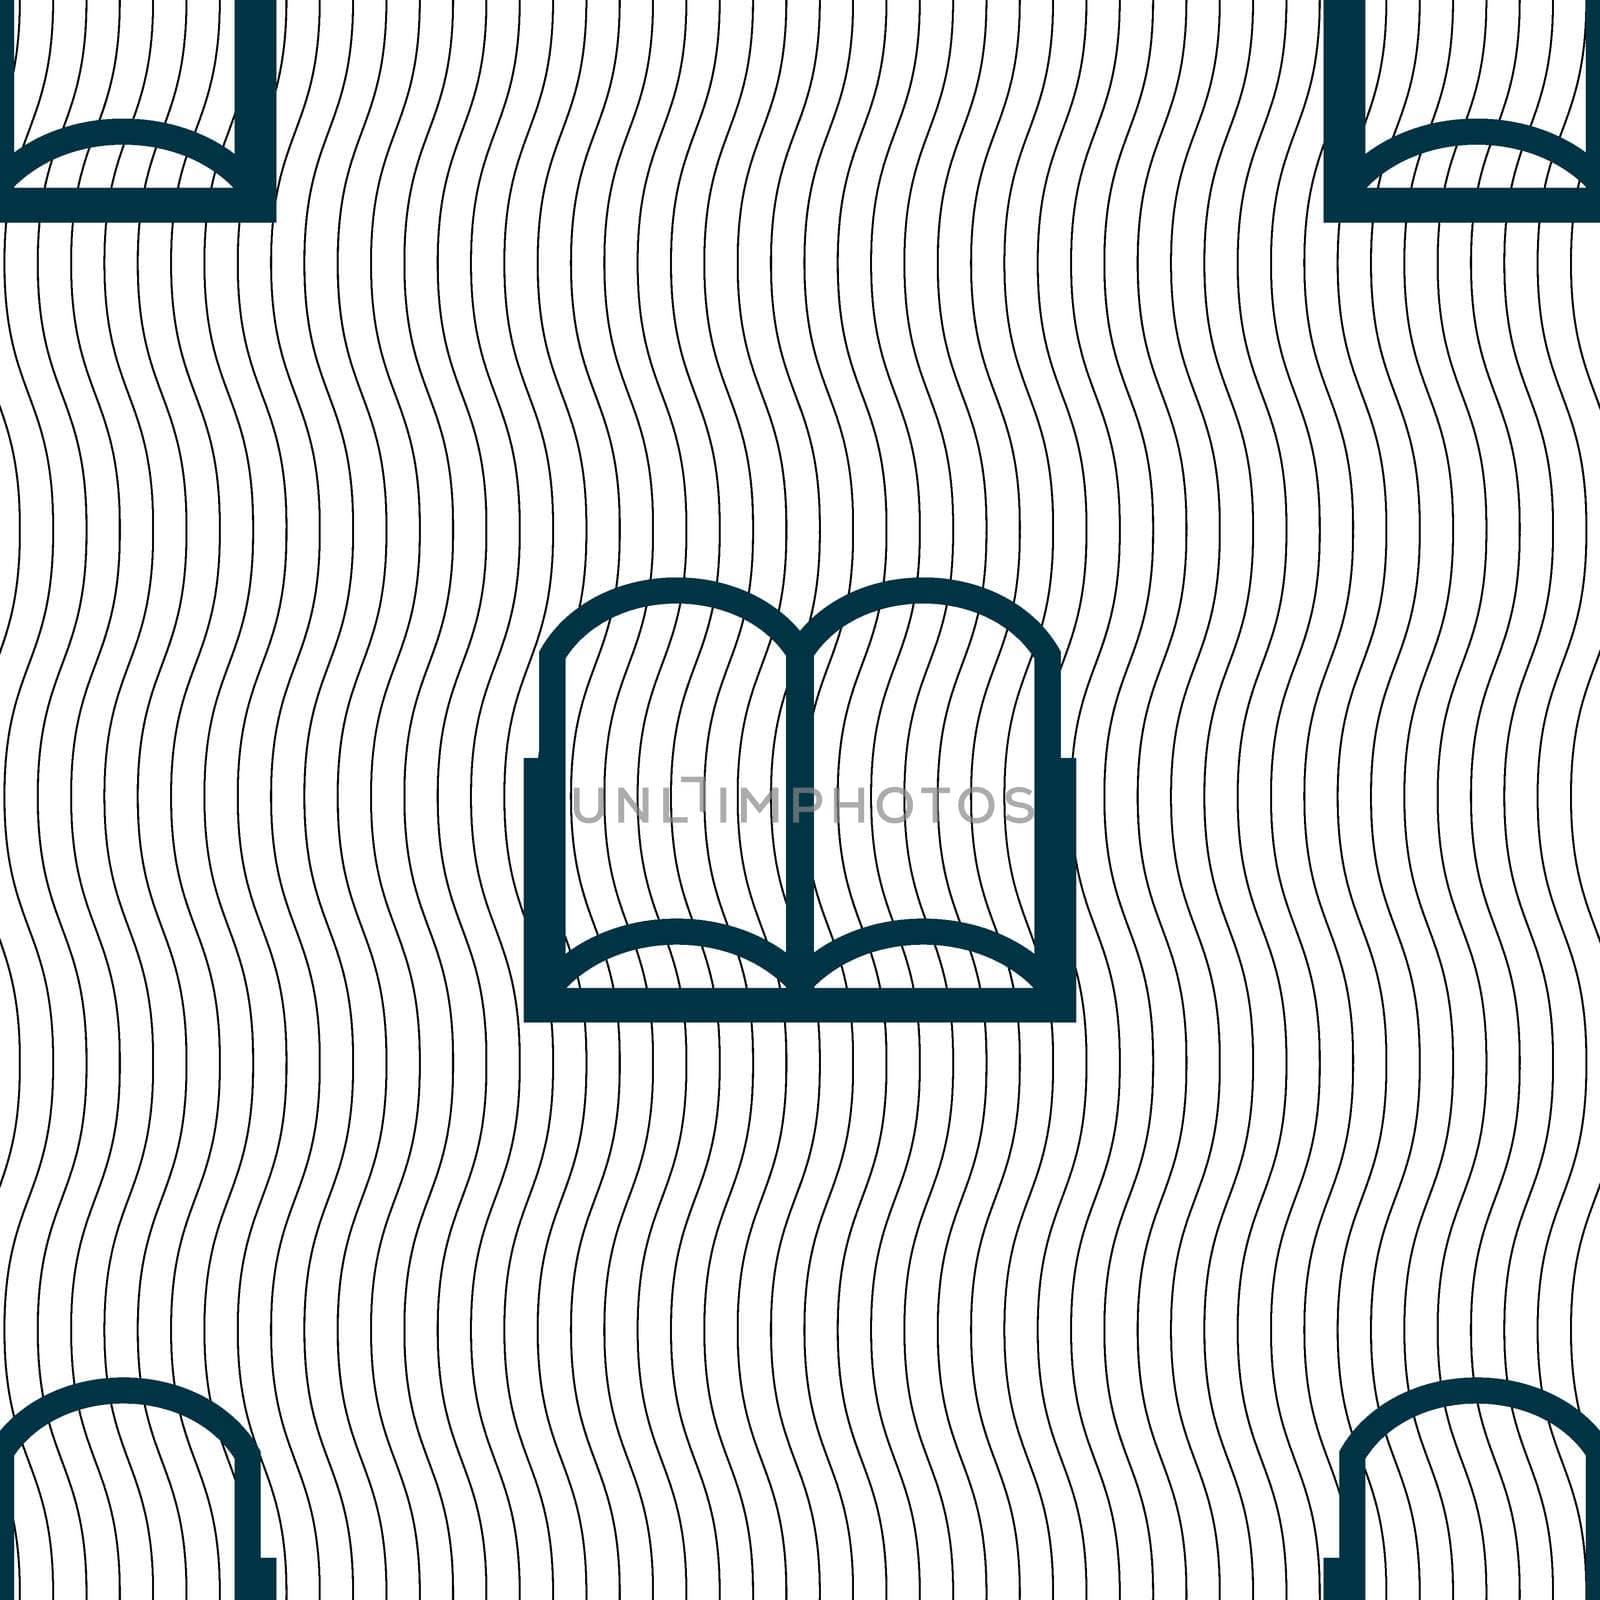 Book sign icon. Open book symbol. Seamless pattern with geometric texture. illustration